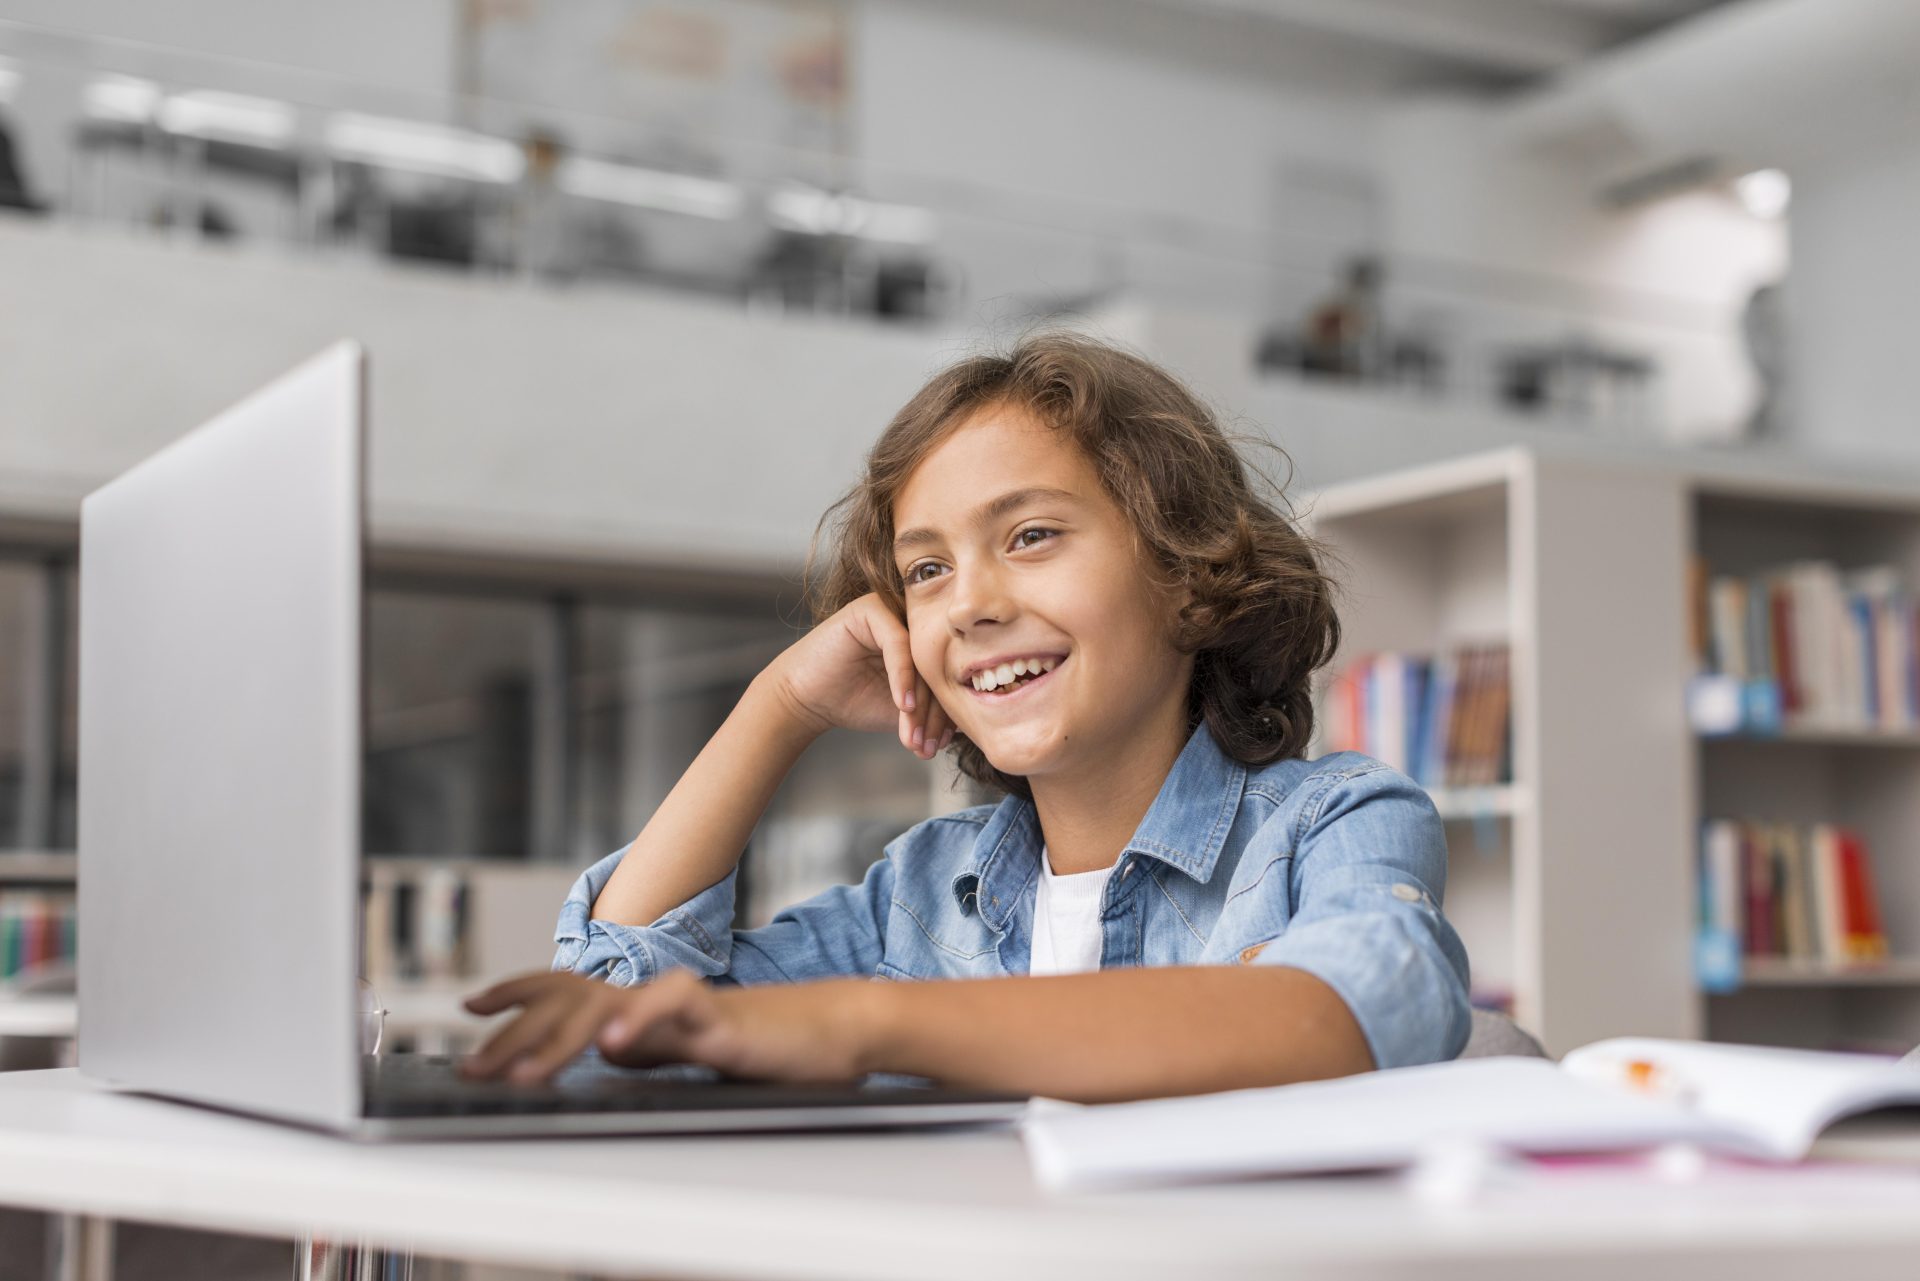 Internet Schooling: The Benefits of Online Education for Students